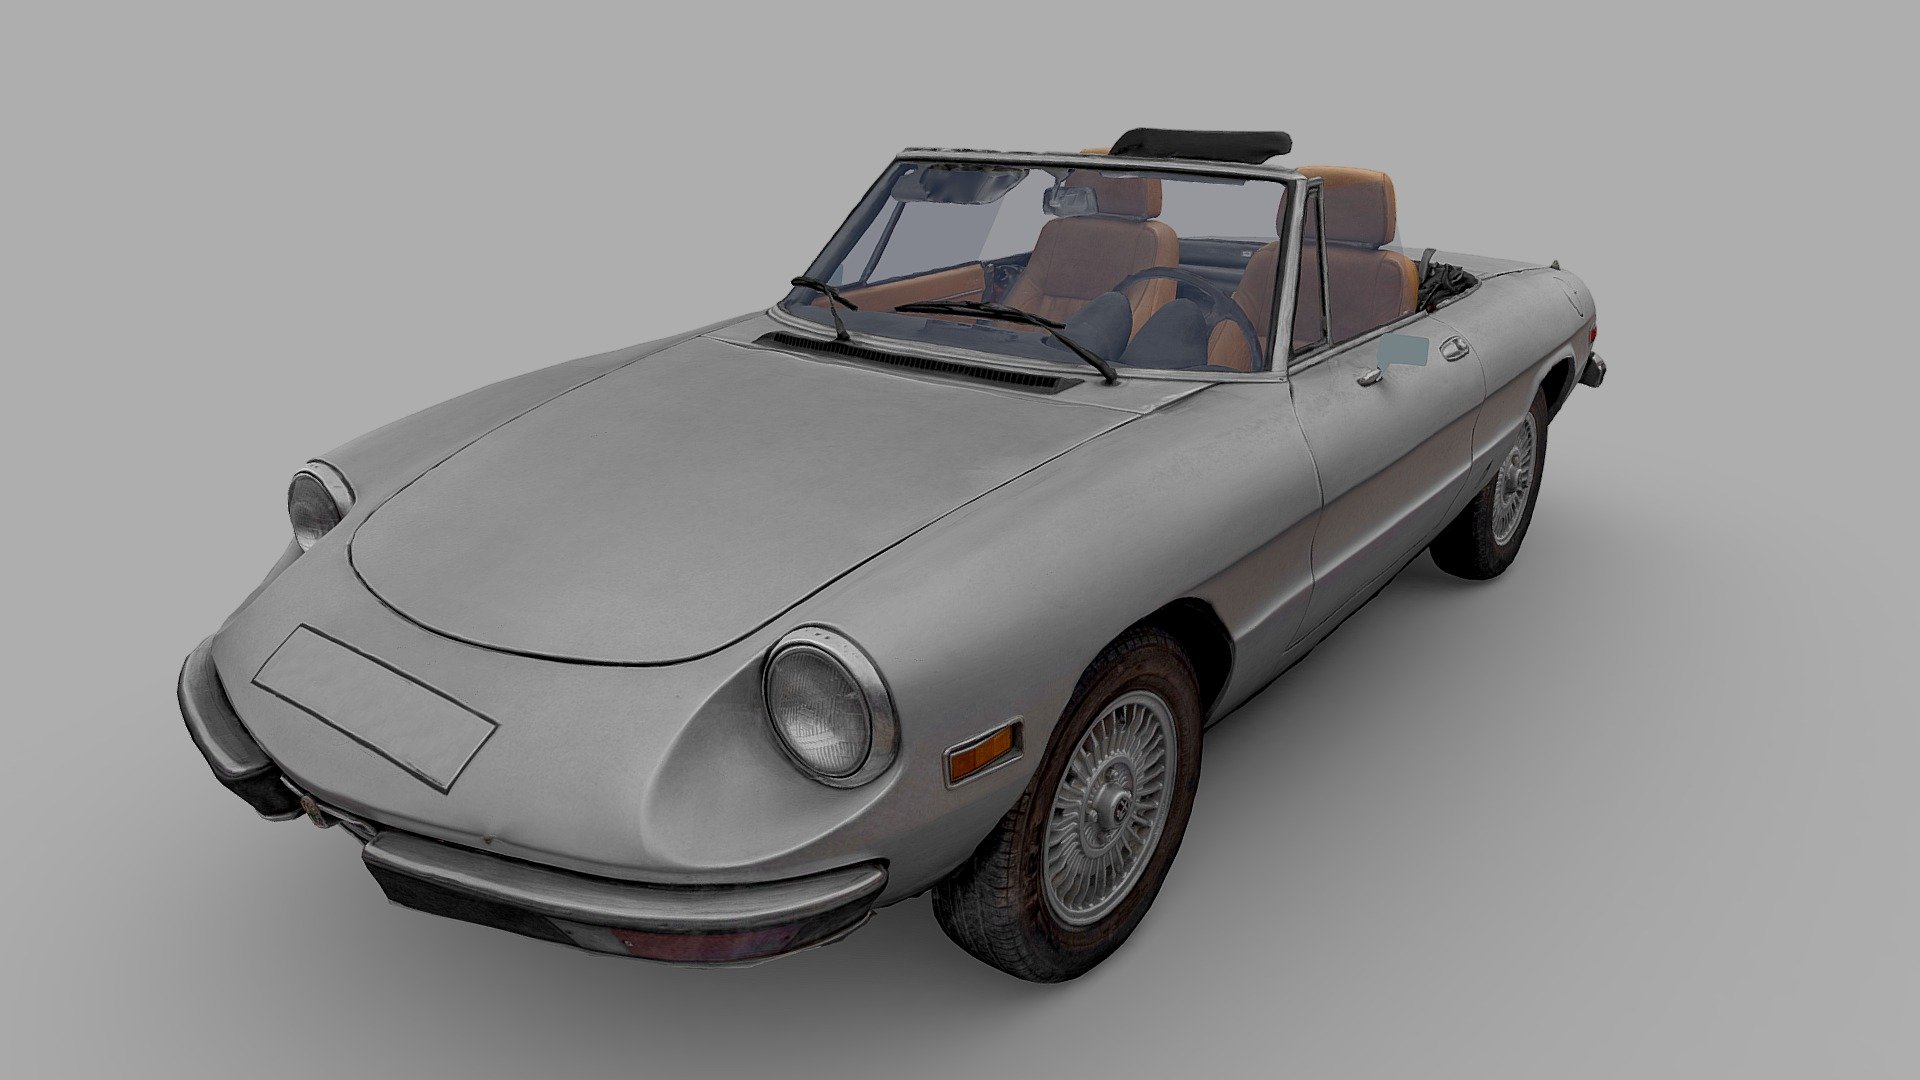 Photogrammetry of vintage car: Alfa Romeo Spider, a James Bond looking car.
This machine belongs to the Series 2 (1970–1982/83)
The Alfa Romeo Spider (105/115 series) is a two-seater, front engine, rear drive roadster manufactured and marketed by Alfa Romeo from 1966 to 1994 in four distinct series, each with modifications ranging from modest to extensive.

As successor to the Giulia Spider, the Spider remained in production for almost three decades. The first three series were assembled by Pininfarina in Grugliasco and the fourth series in San Giorgio Canavese. The last Spider was manufactured in April 1993 — the last rear wheel drive Alfa Romeo before the Alfa Romeo 8C Competizione of 2007.

In 2012, FCA Italy and Mazda studied the possibility of jointly developing a new Spider for 2015 based on the Mazda MX-5 platform.
Ultimately, FCA and Mazda chose to manufacture a modern interpretation of the Fiat 124 Sport Spider rather than reviving the Alfa Romeo Spider - Alfa Romeo Spider Series 2 (1973) - 3D model by Raiz (@RaizVR) 3d model